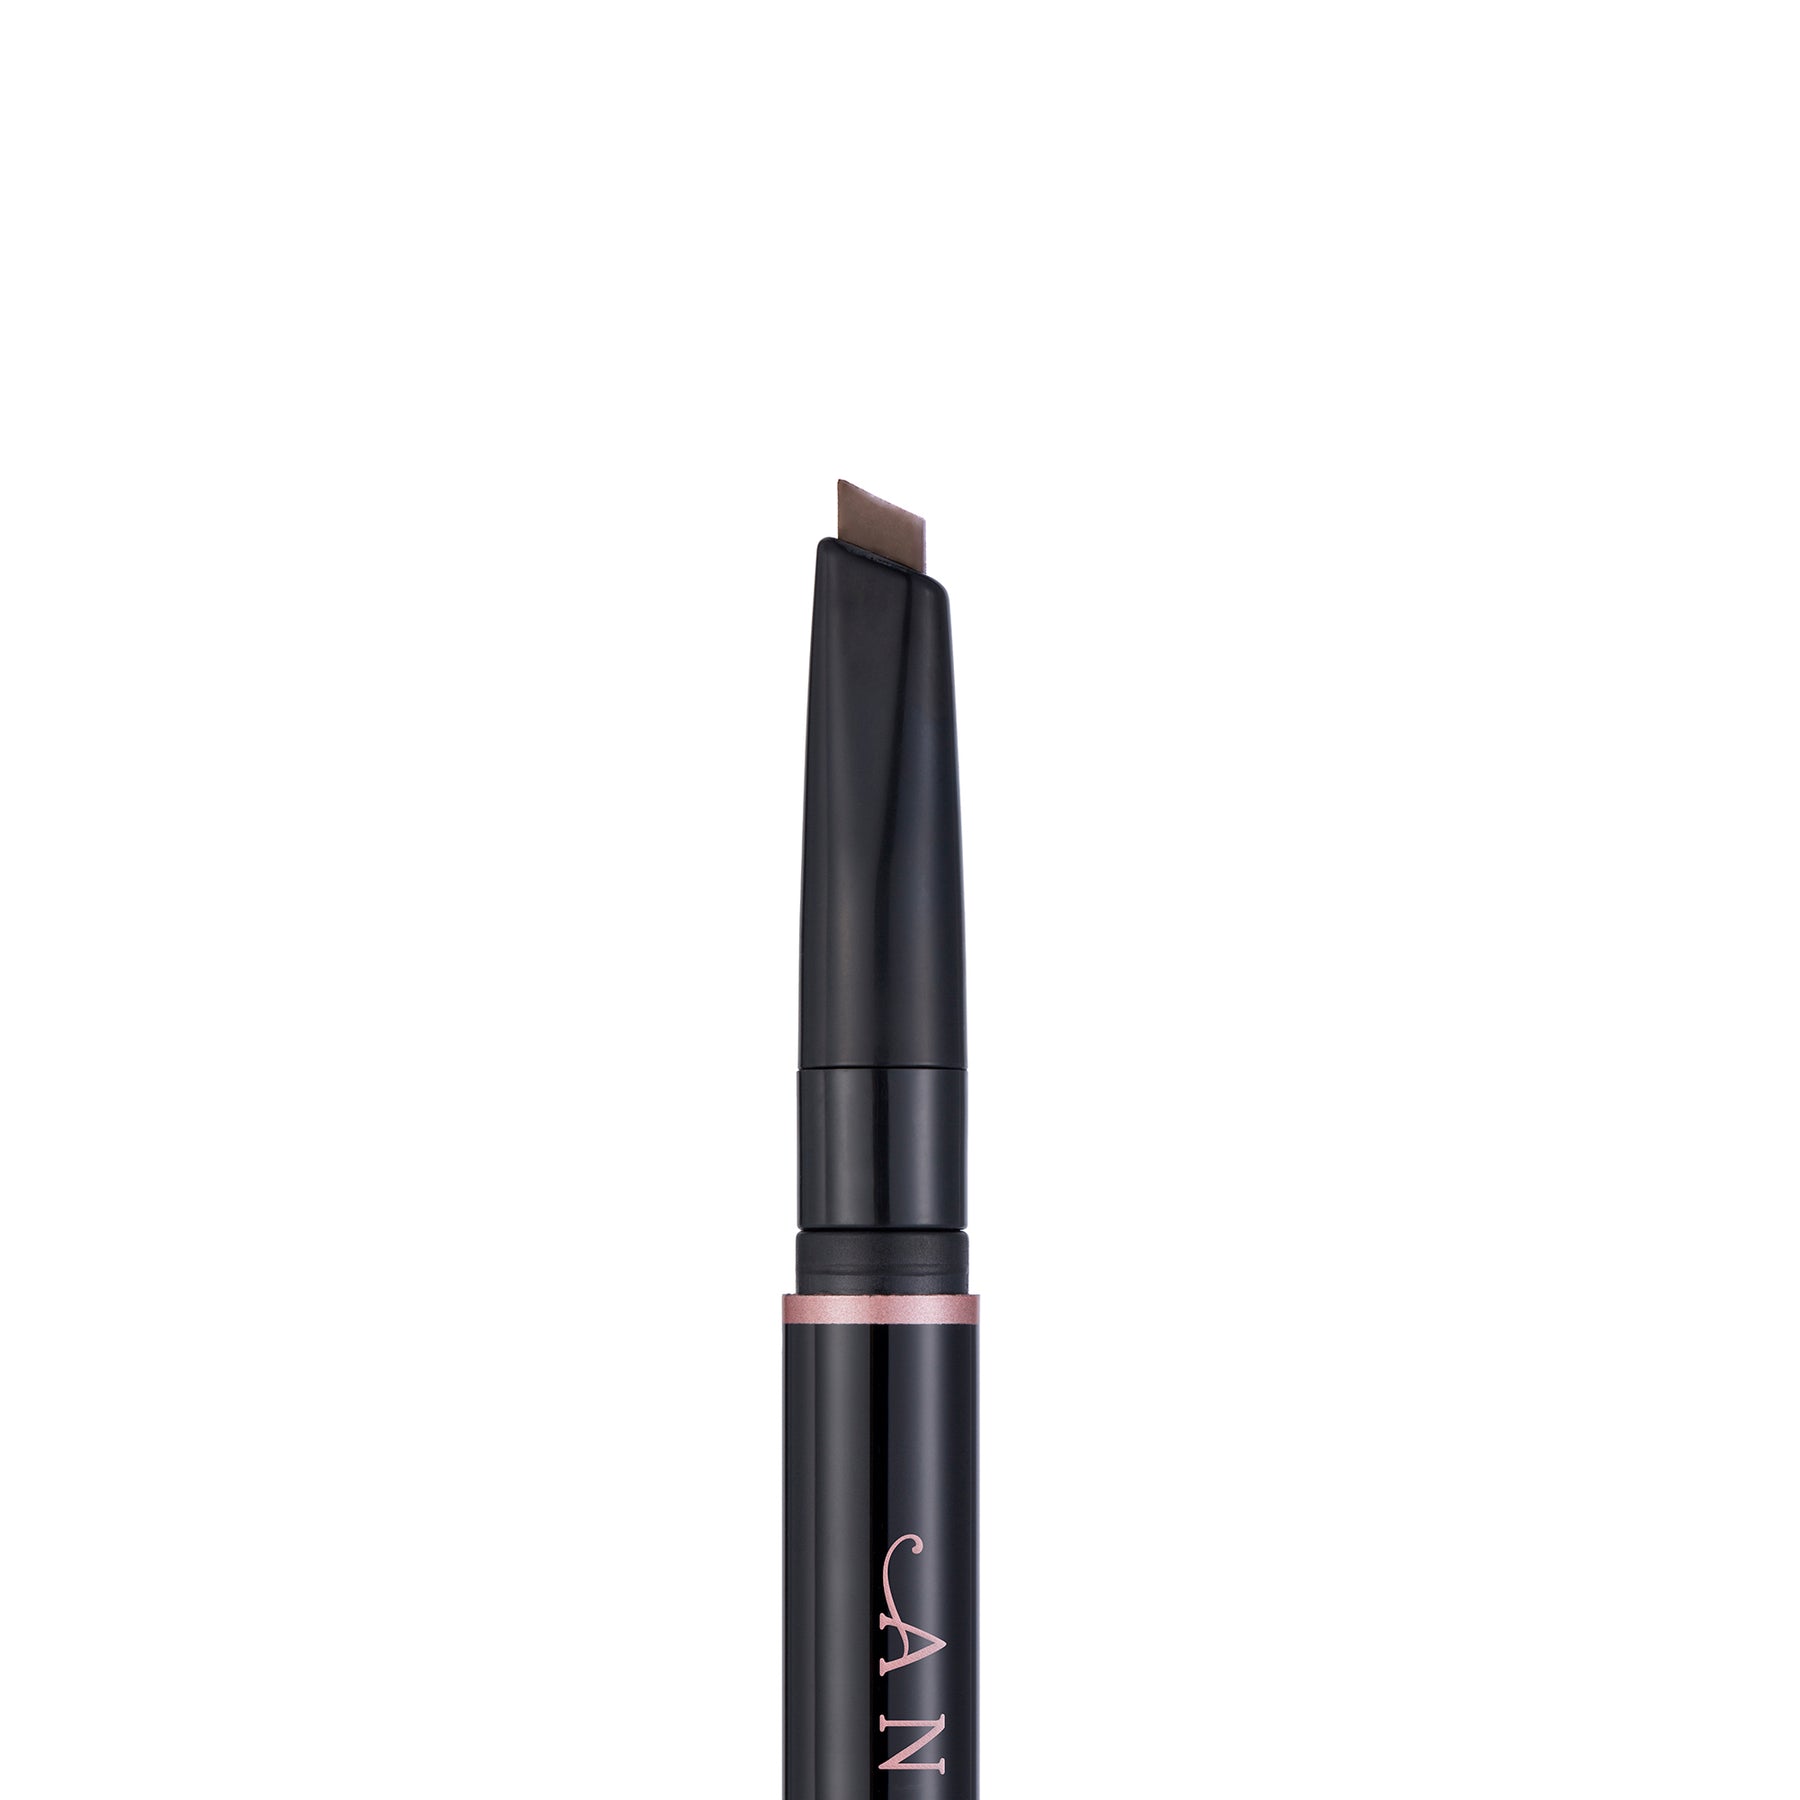 Hills Beverly Beauty Brow Anastasia Editor – Definer The